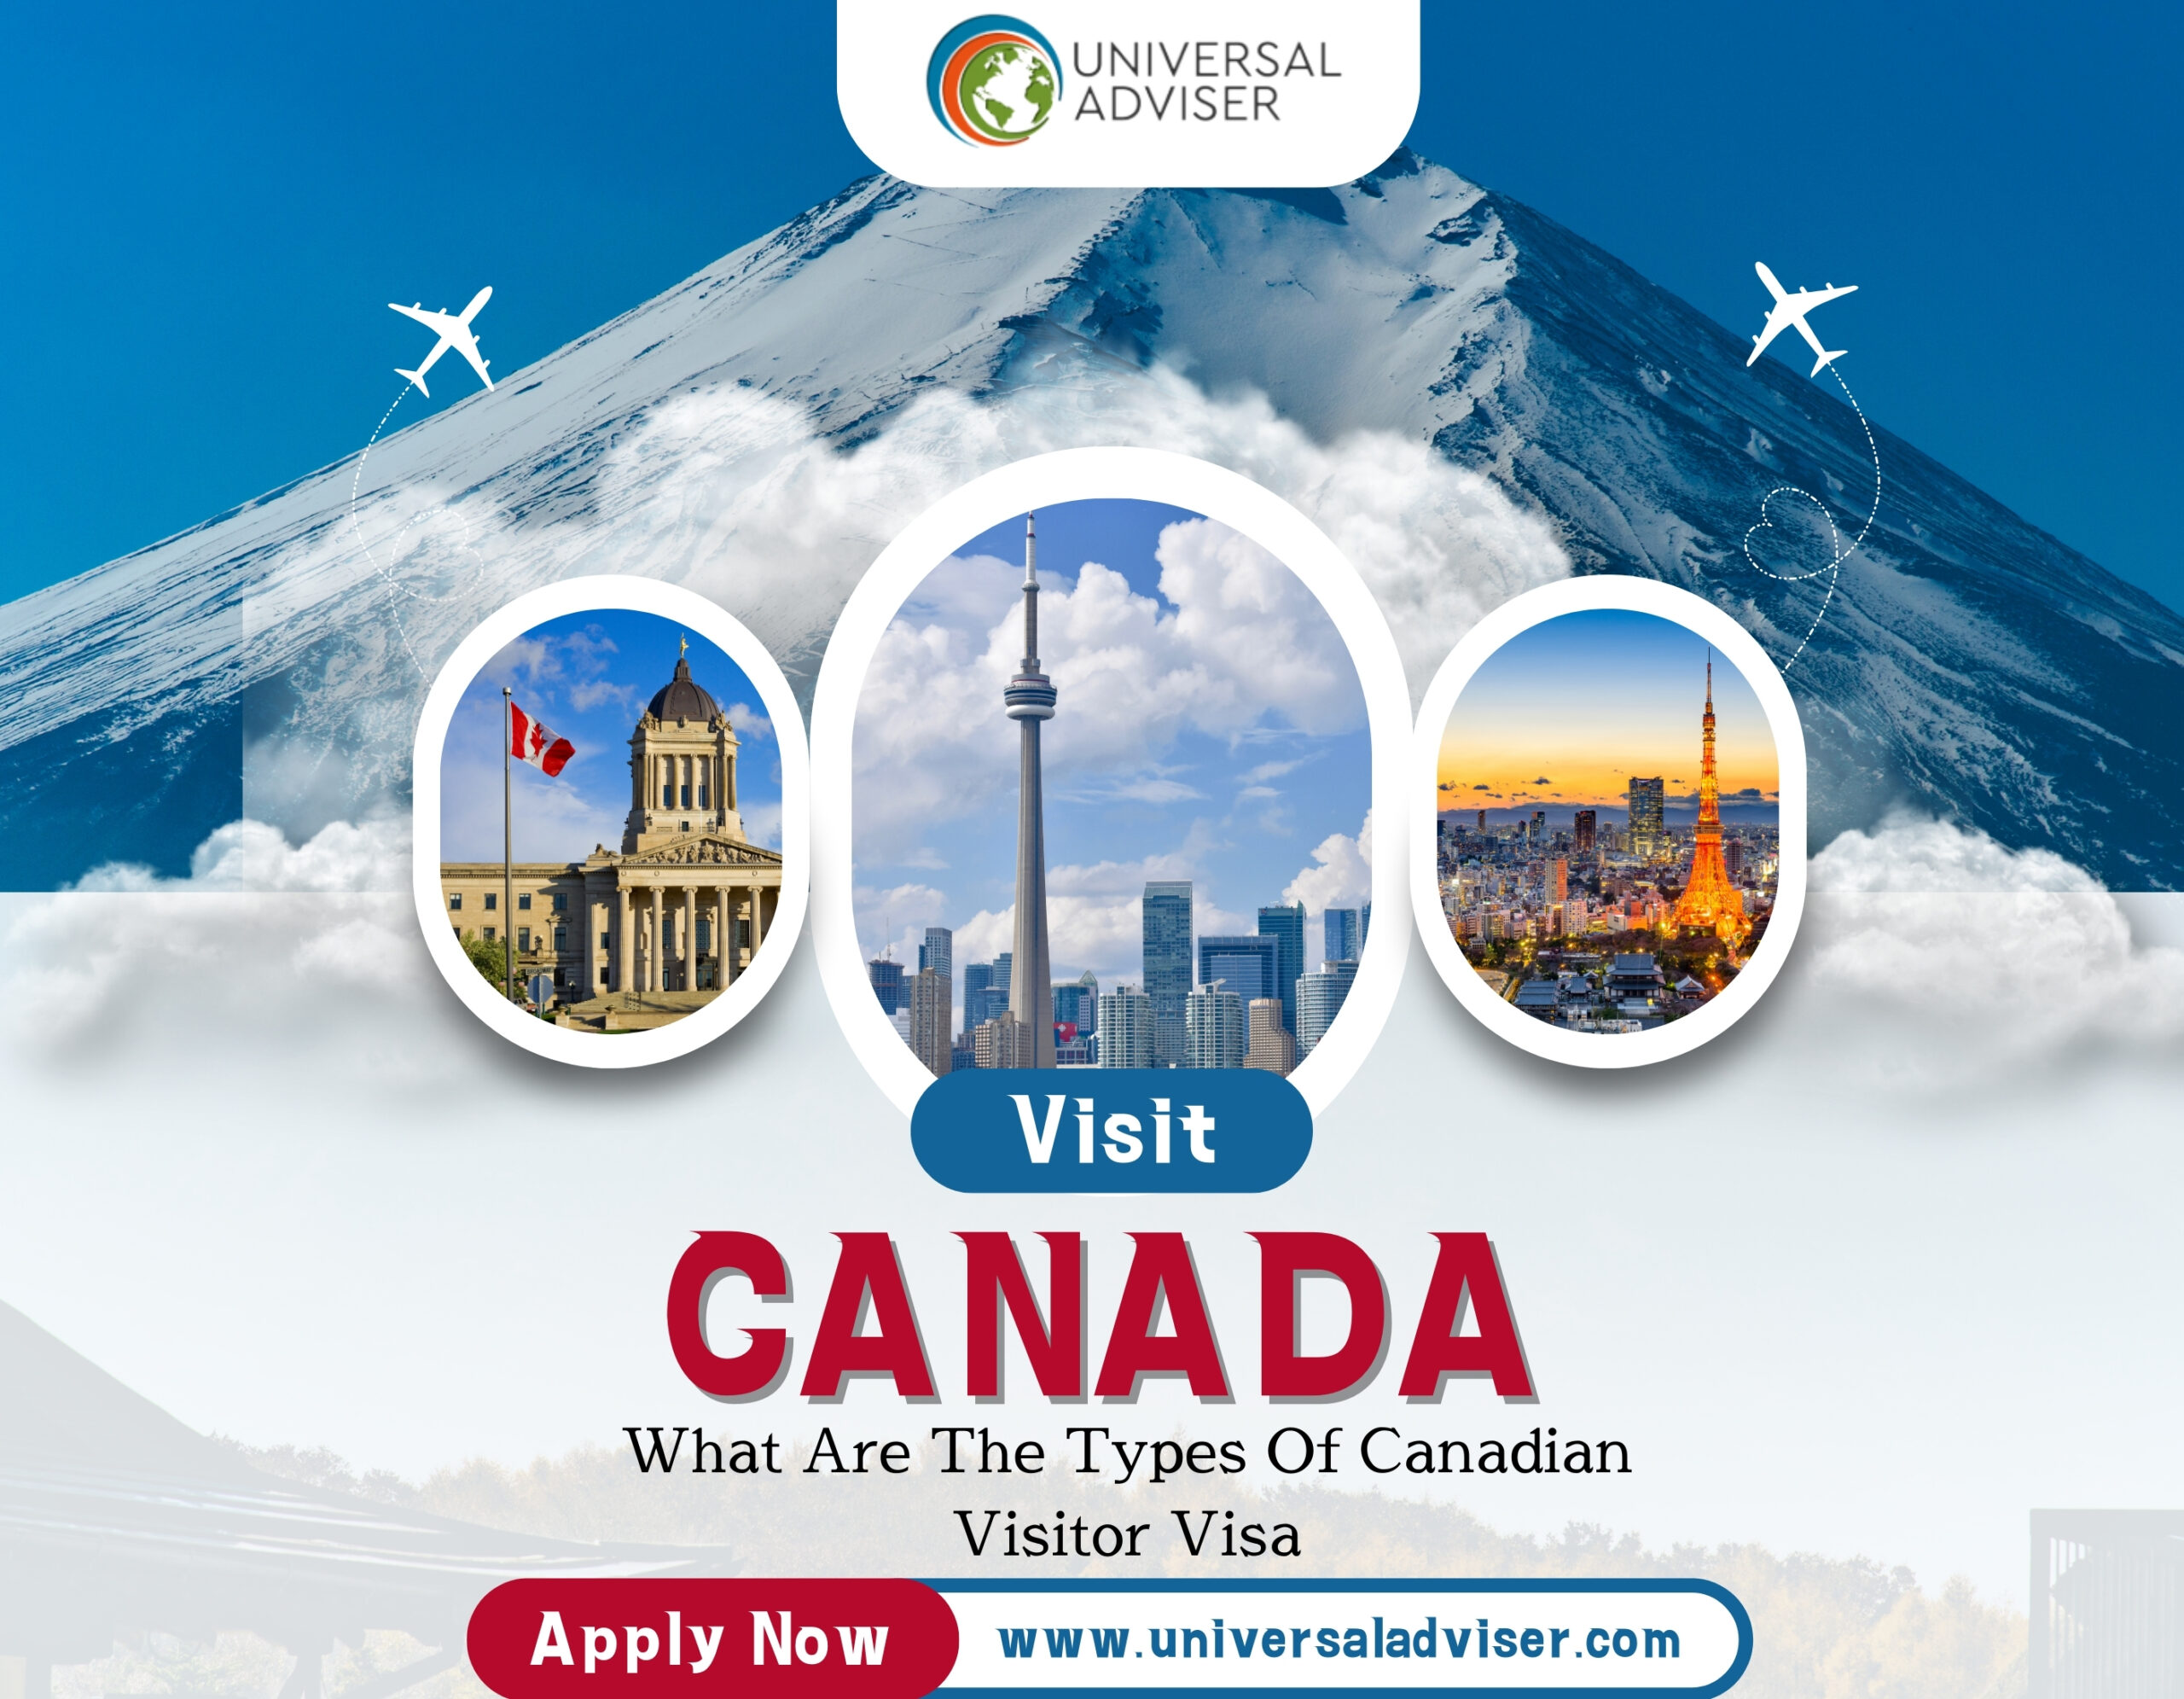 What Are the Types of Canadian Visitor Visa